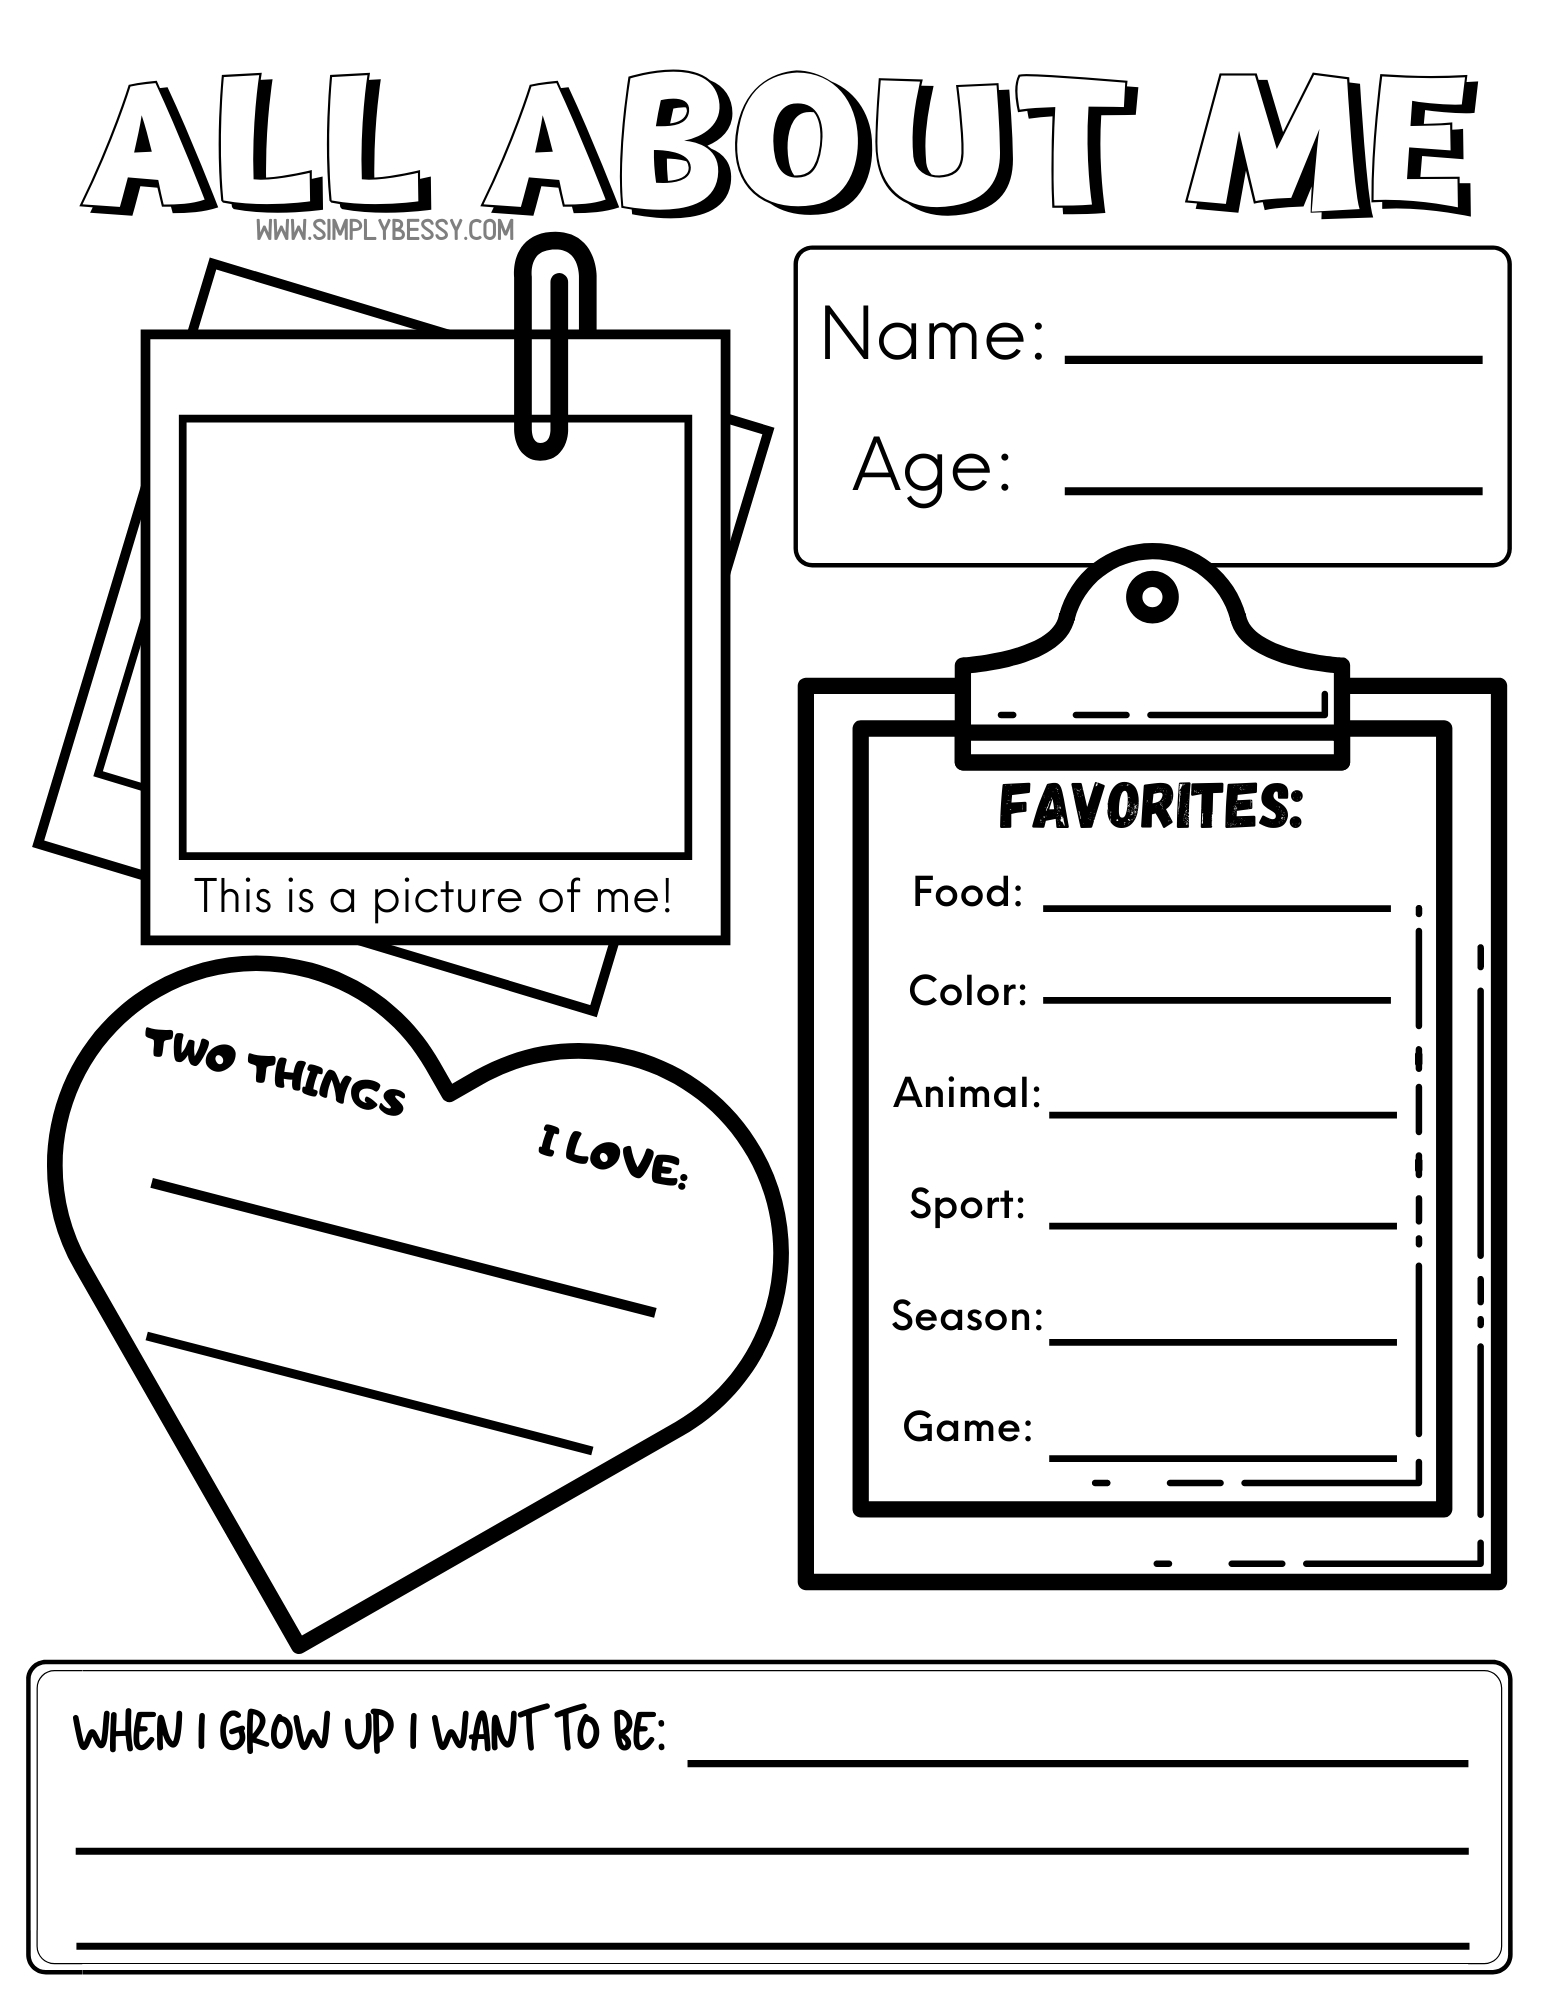 Free Printable All About Me Template_32465